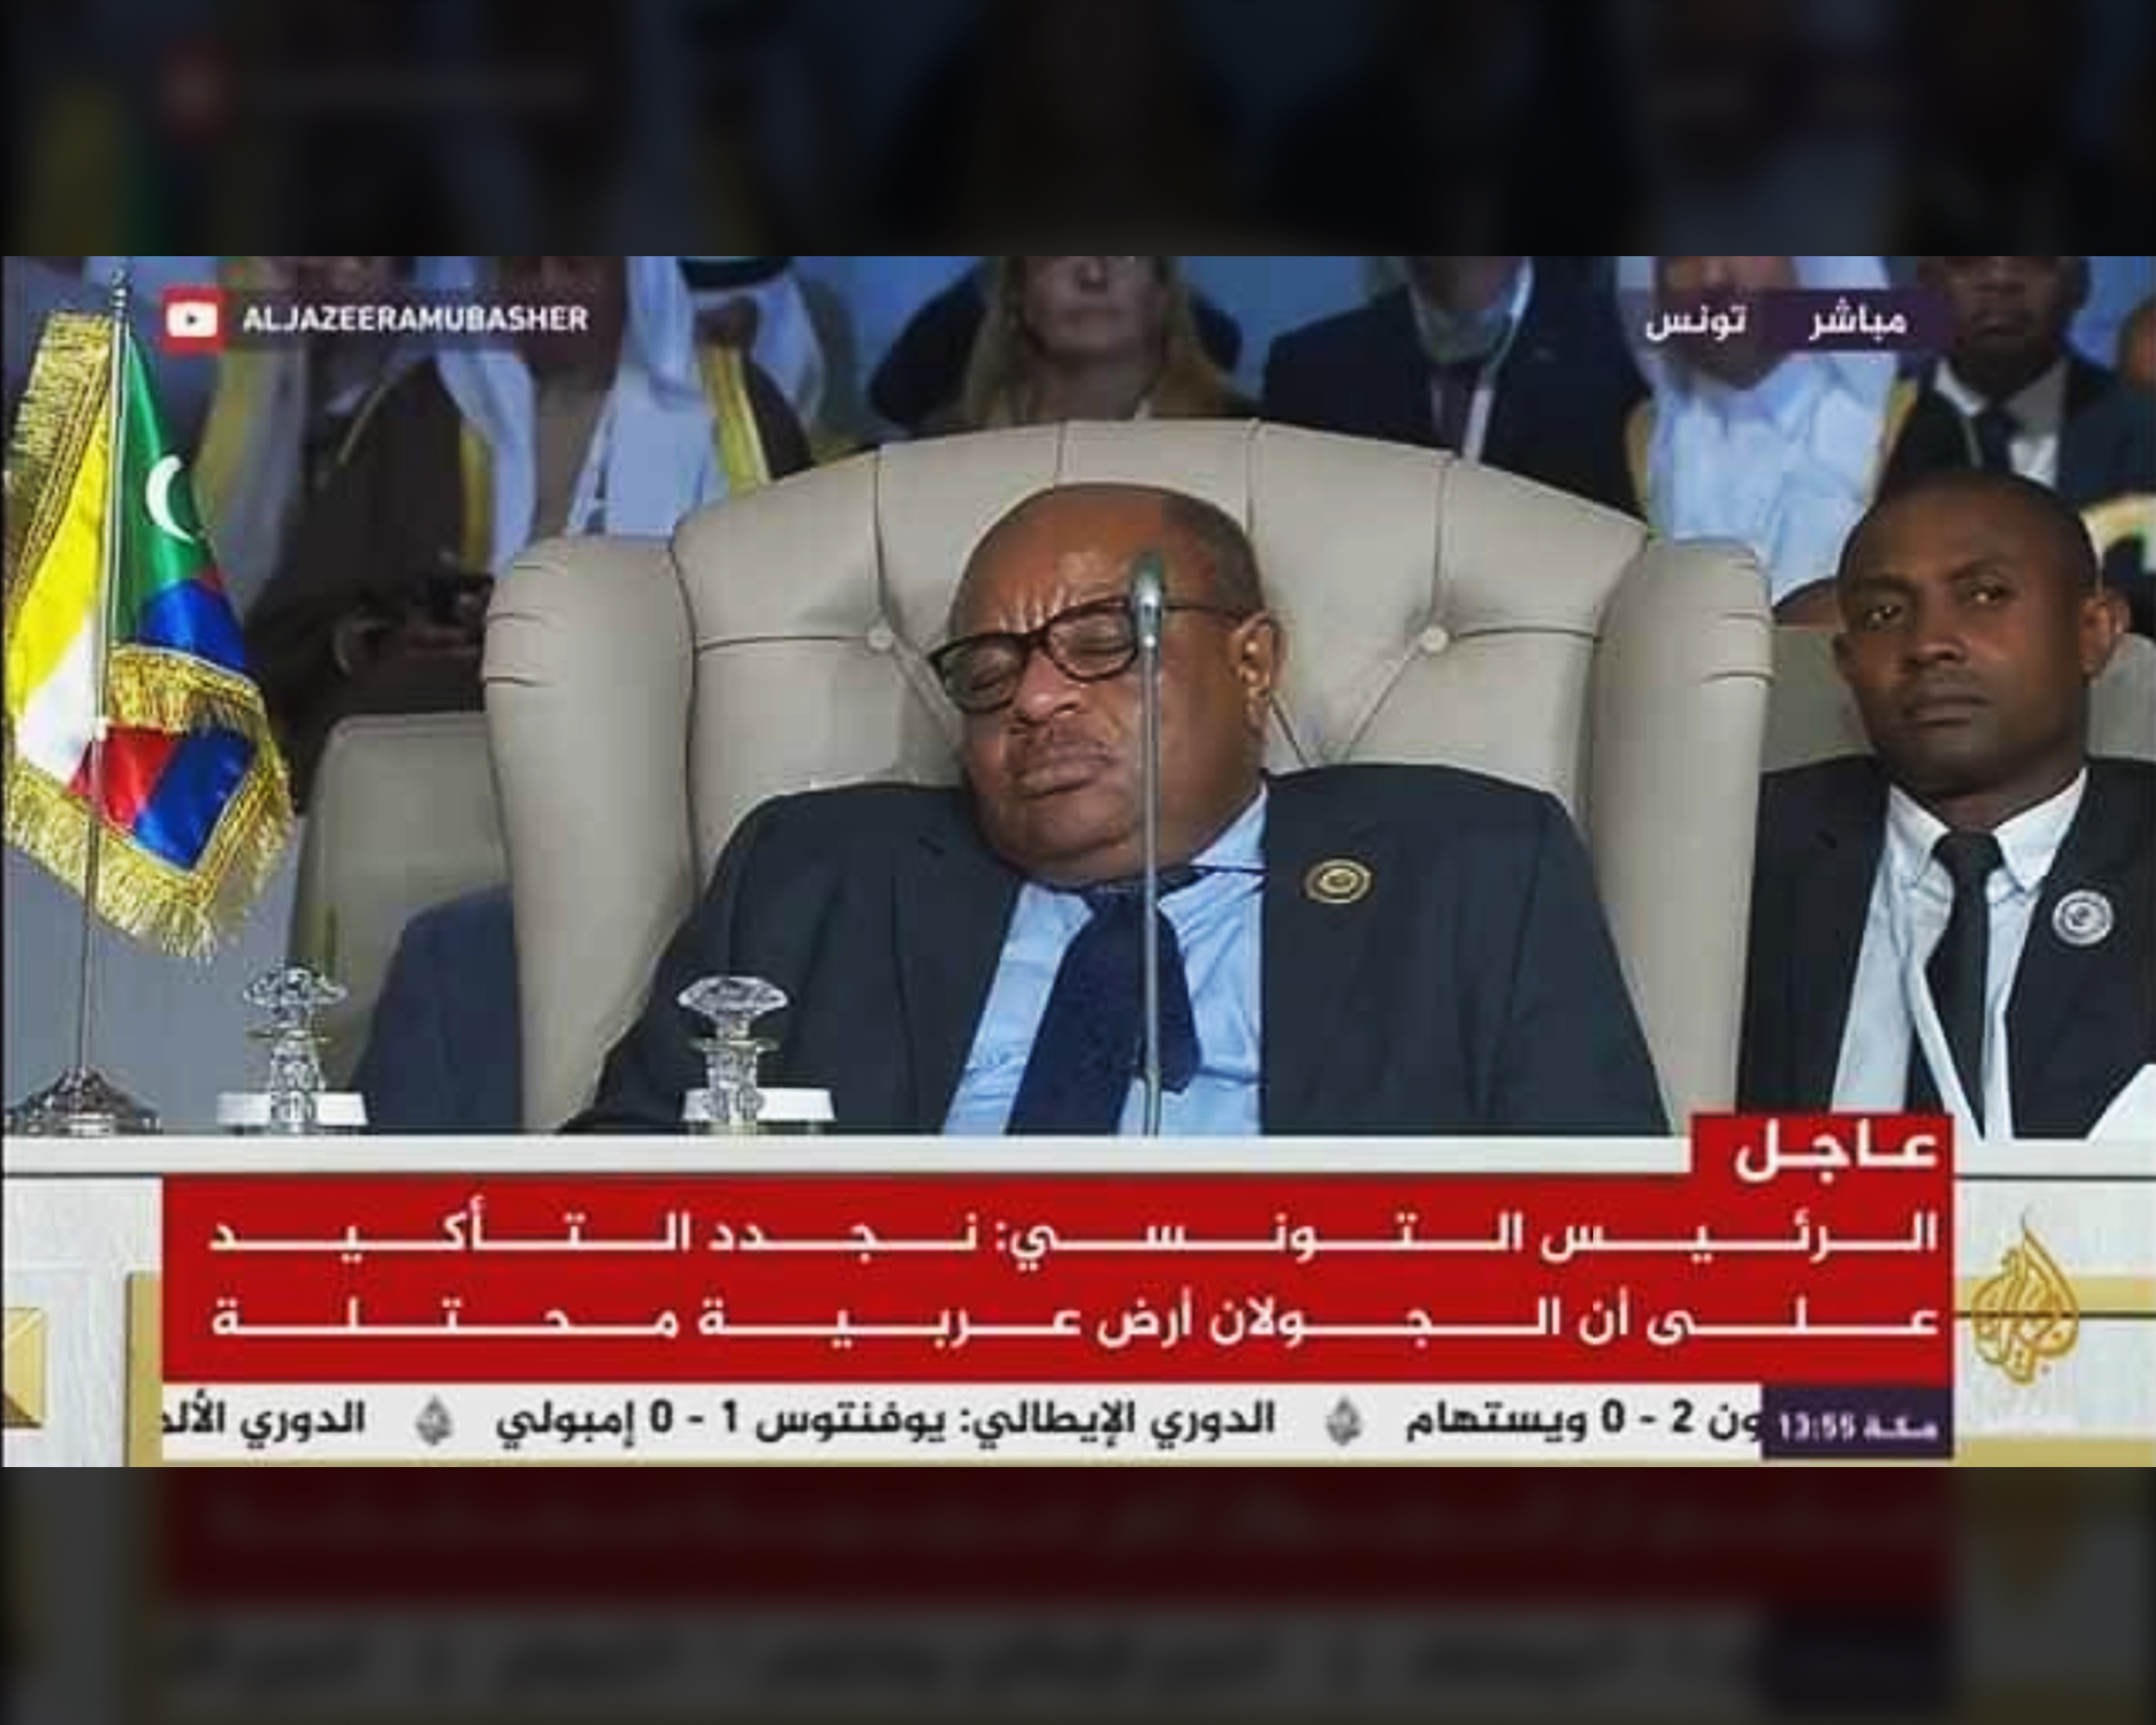 An Al Jazeera news screengrab showing Comoros Foreign Minister Mohamed El Amine apparently sleeping at the Arab League summit in Tunis, Tunisia on March 31, 2019.